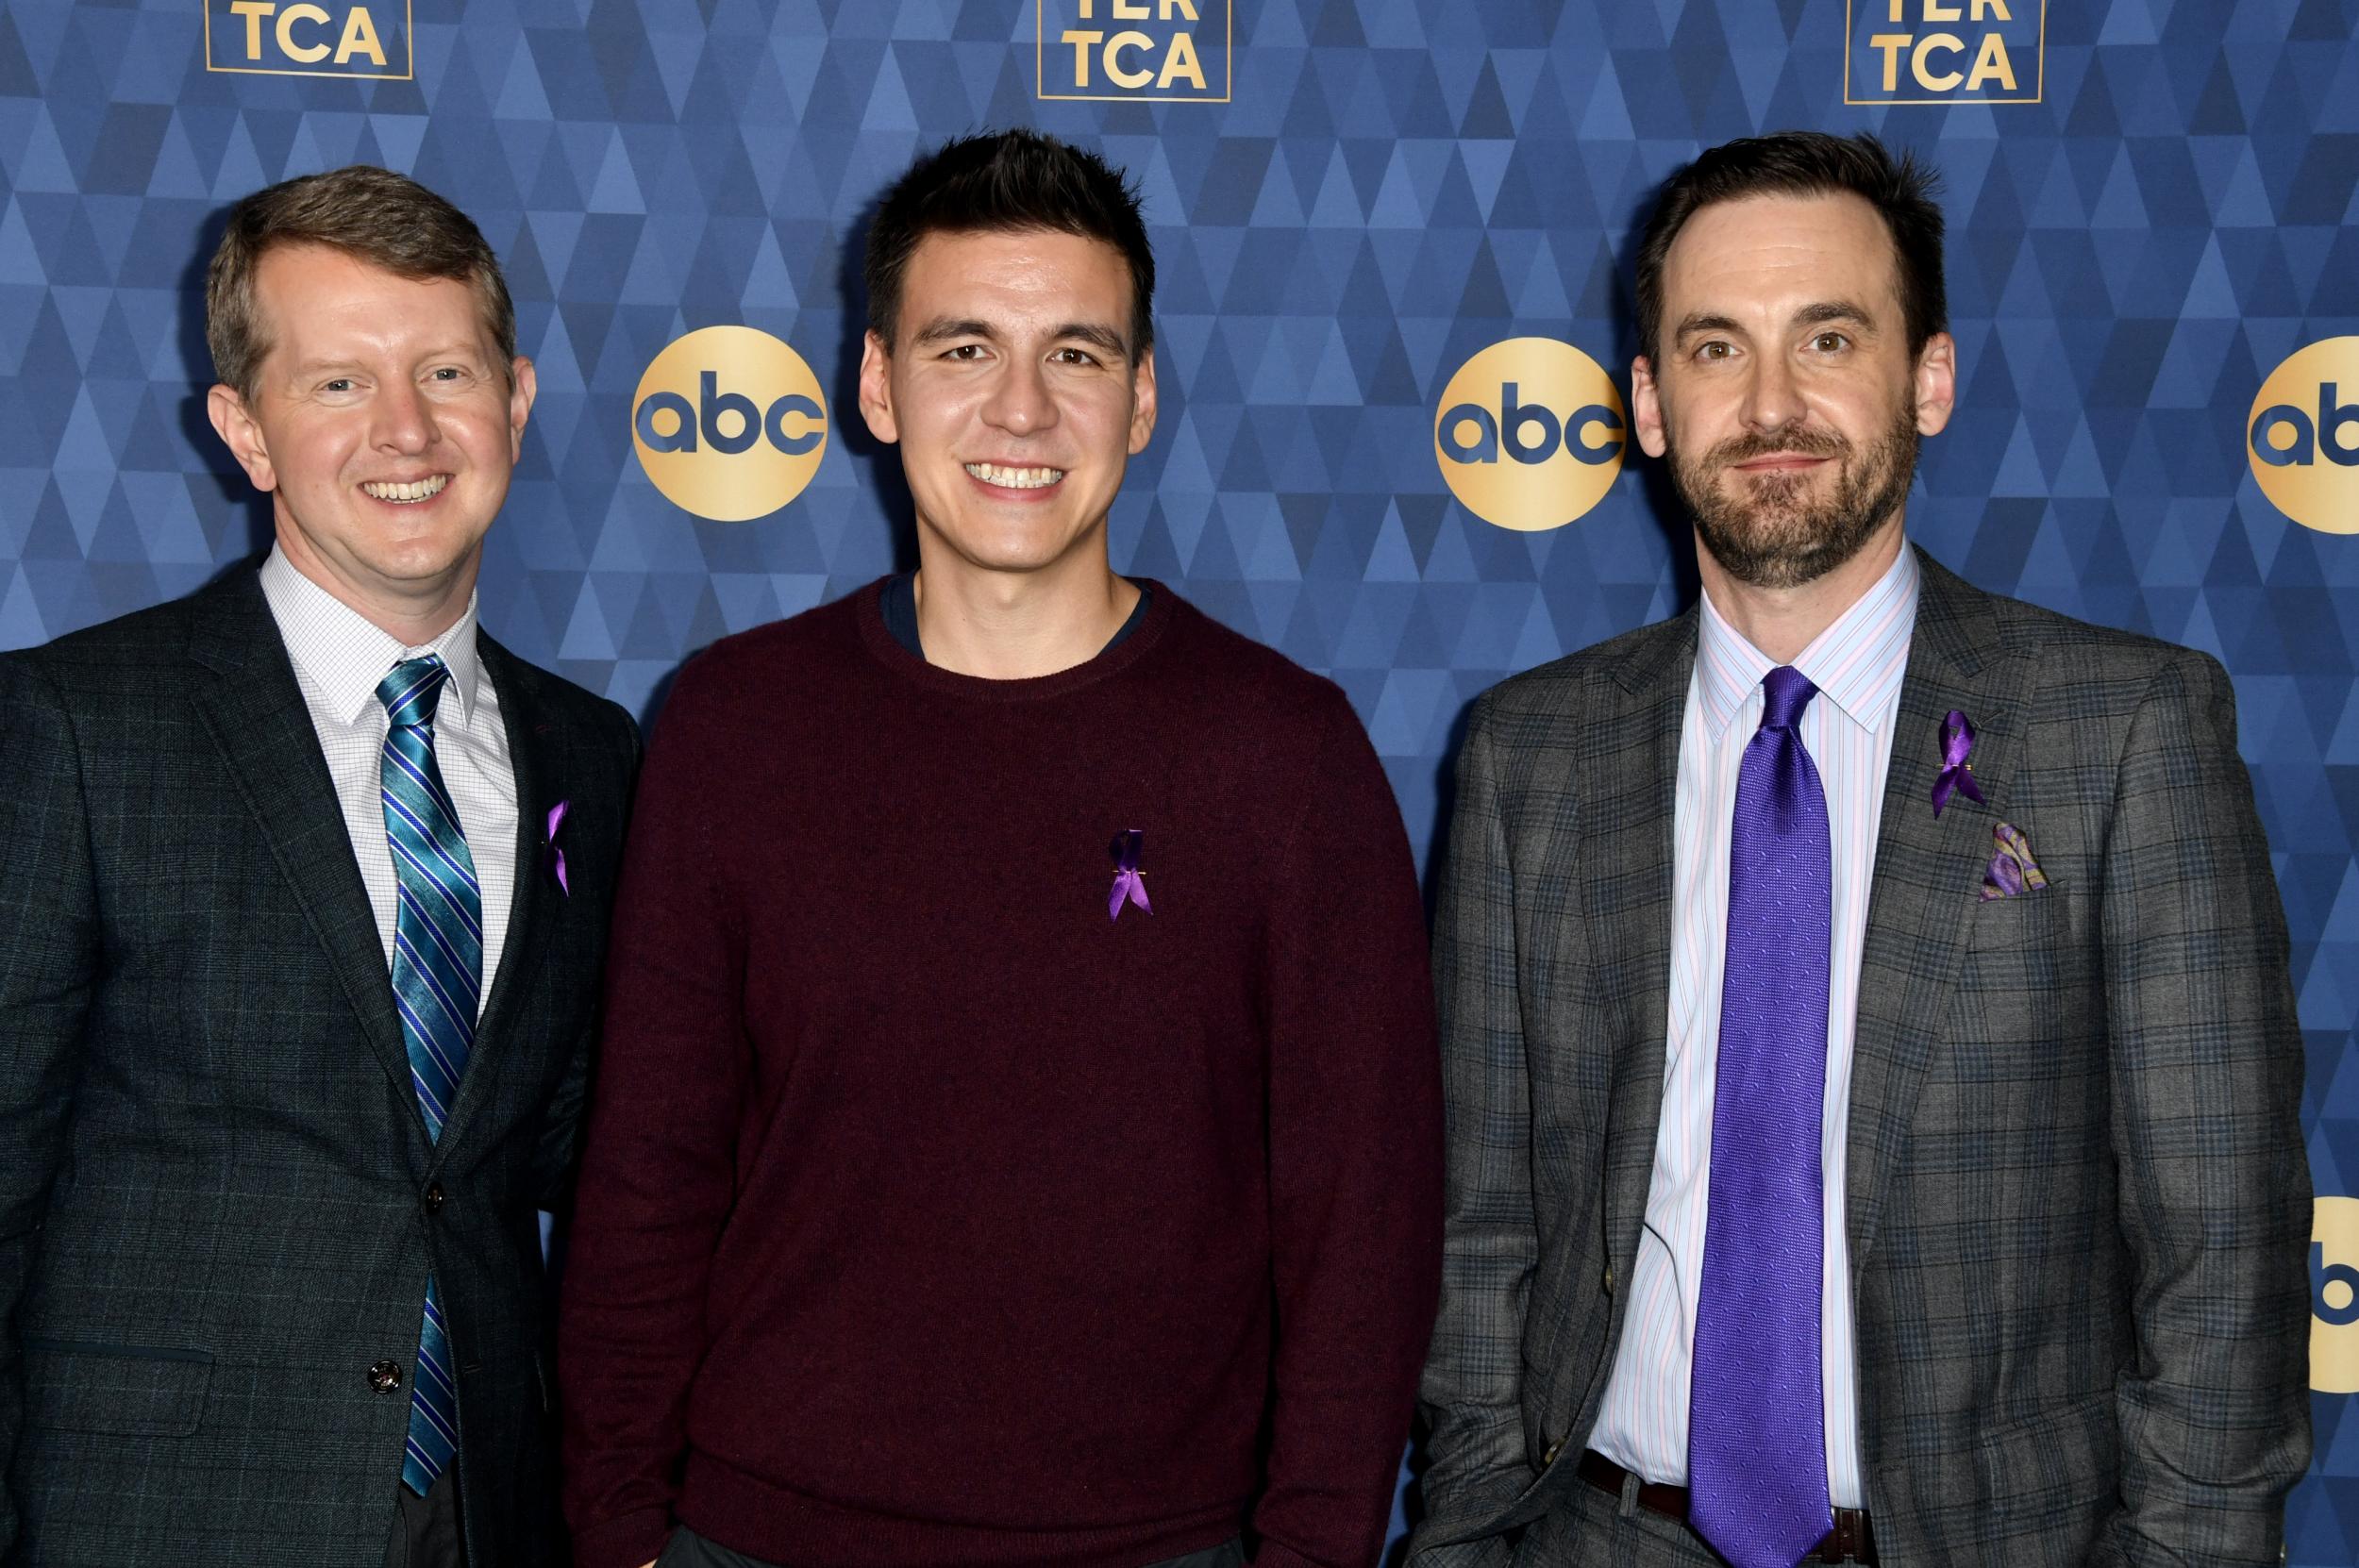 Ken Jennings, James Holzhauer, and Brad Rutter on a press tour on 8 January 2020 in Pasadena, California.